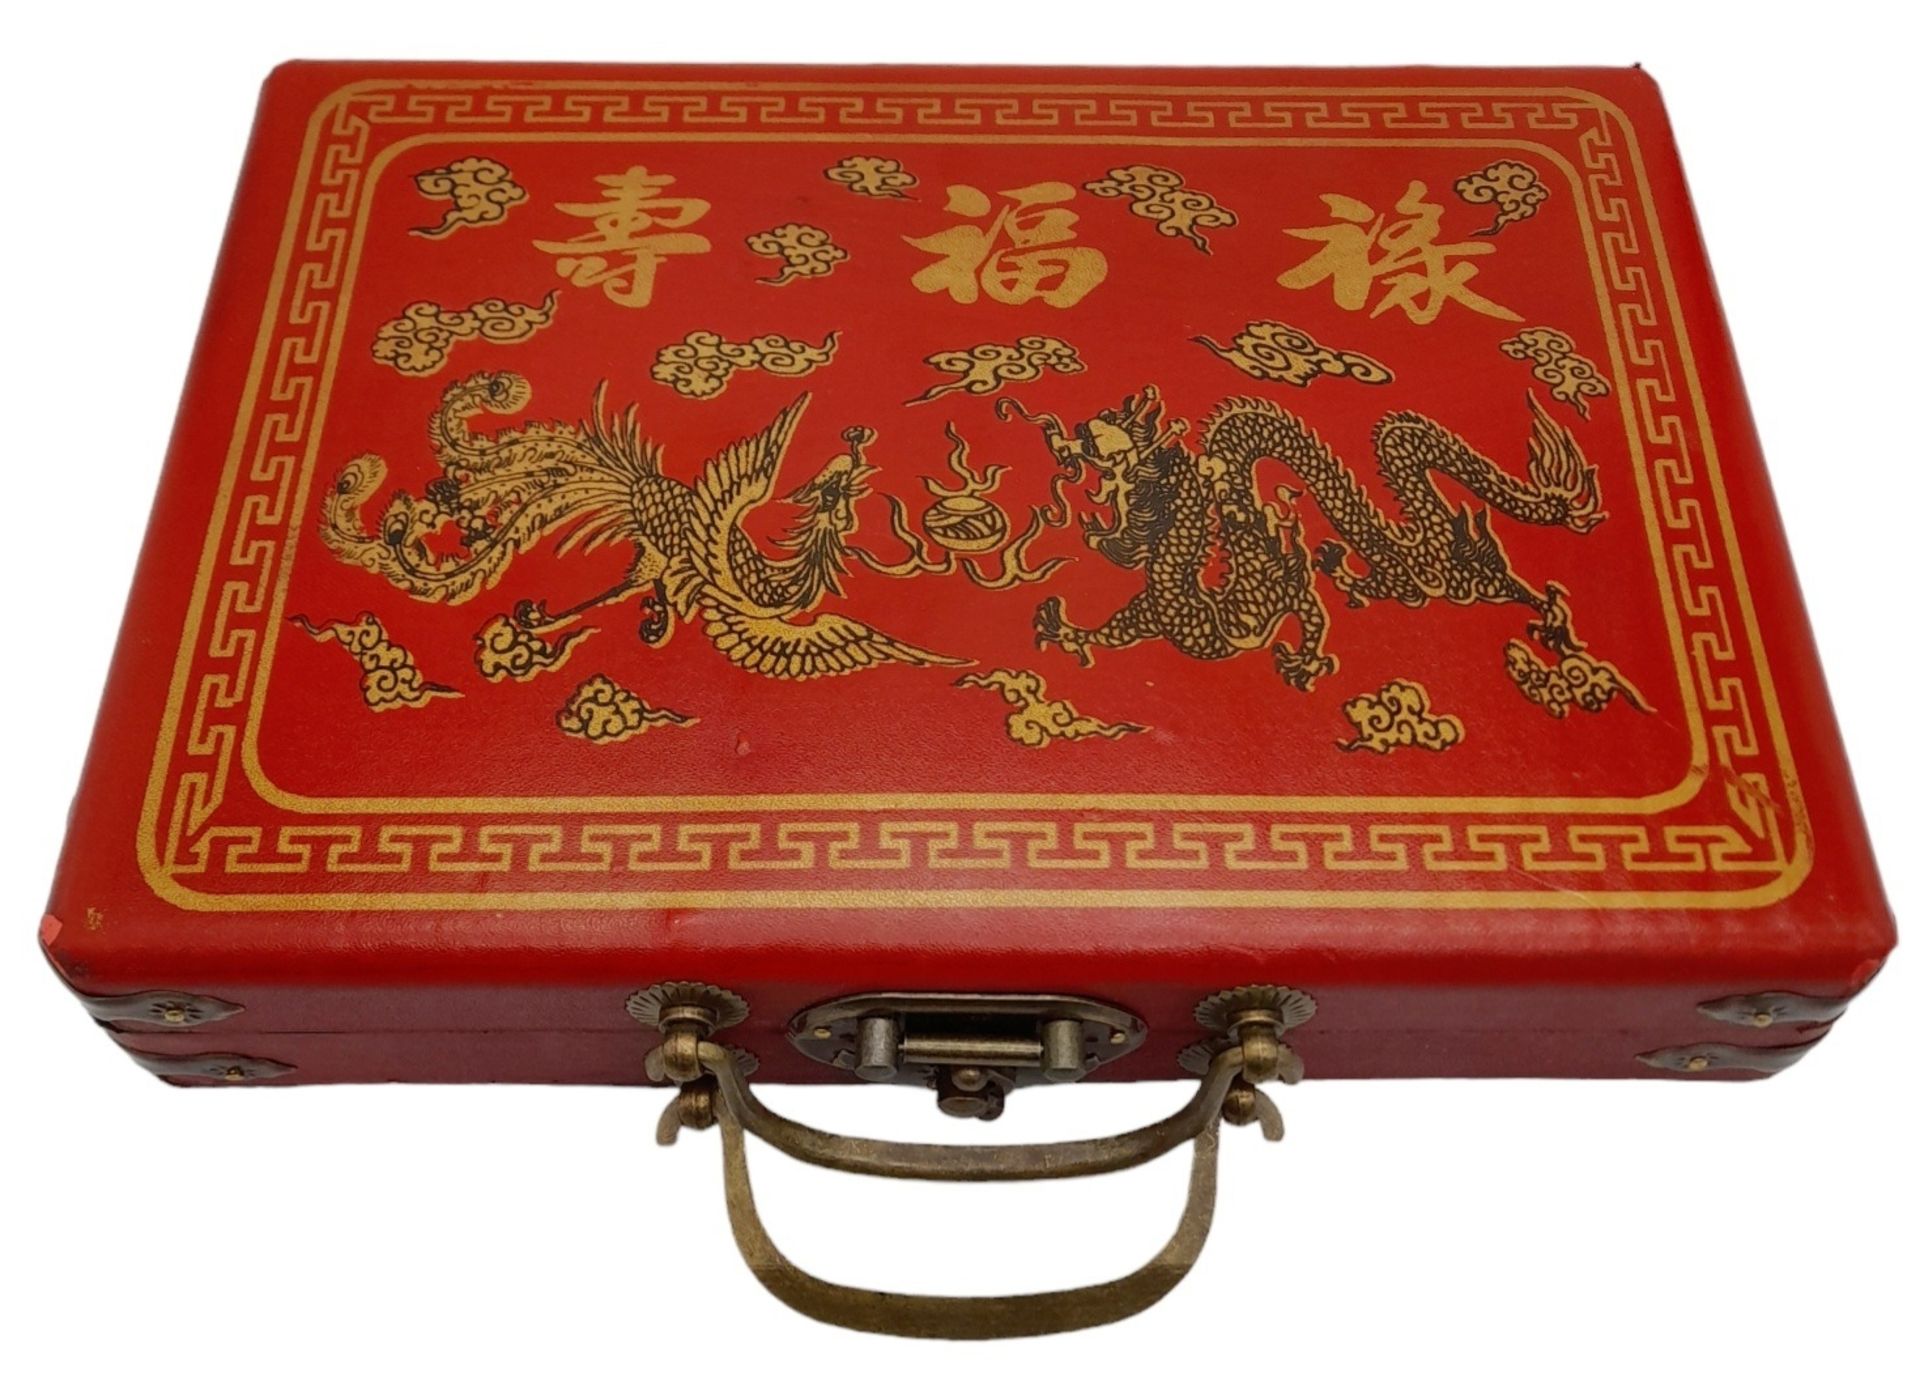 A Mah Jongg Chinese Dice Game in a Small Decorative Travelling Case. In excellent condition. - Bild 2 aus 7